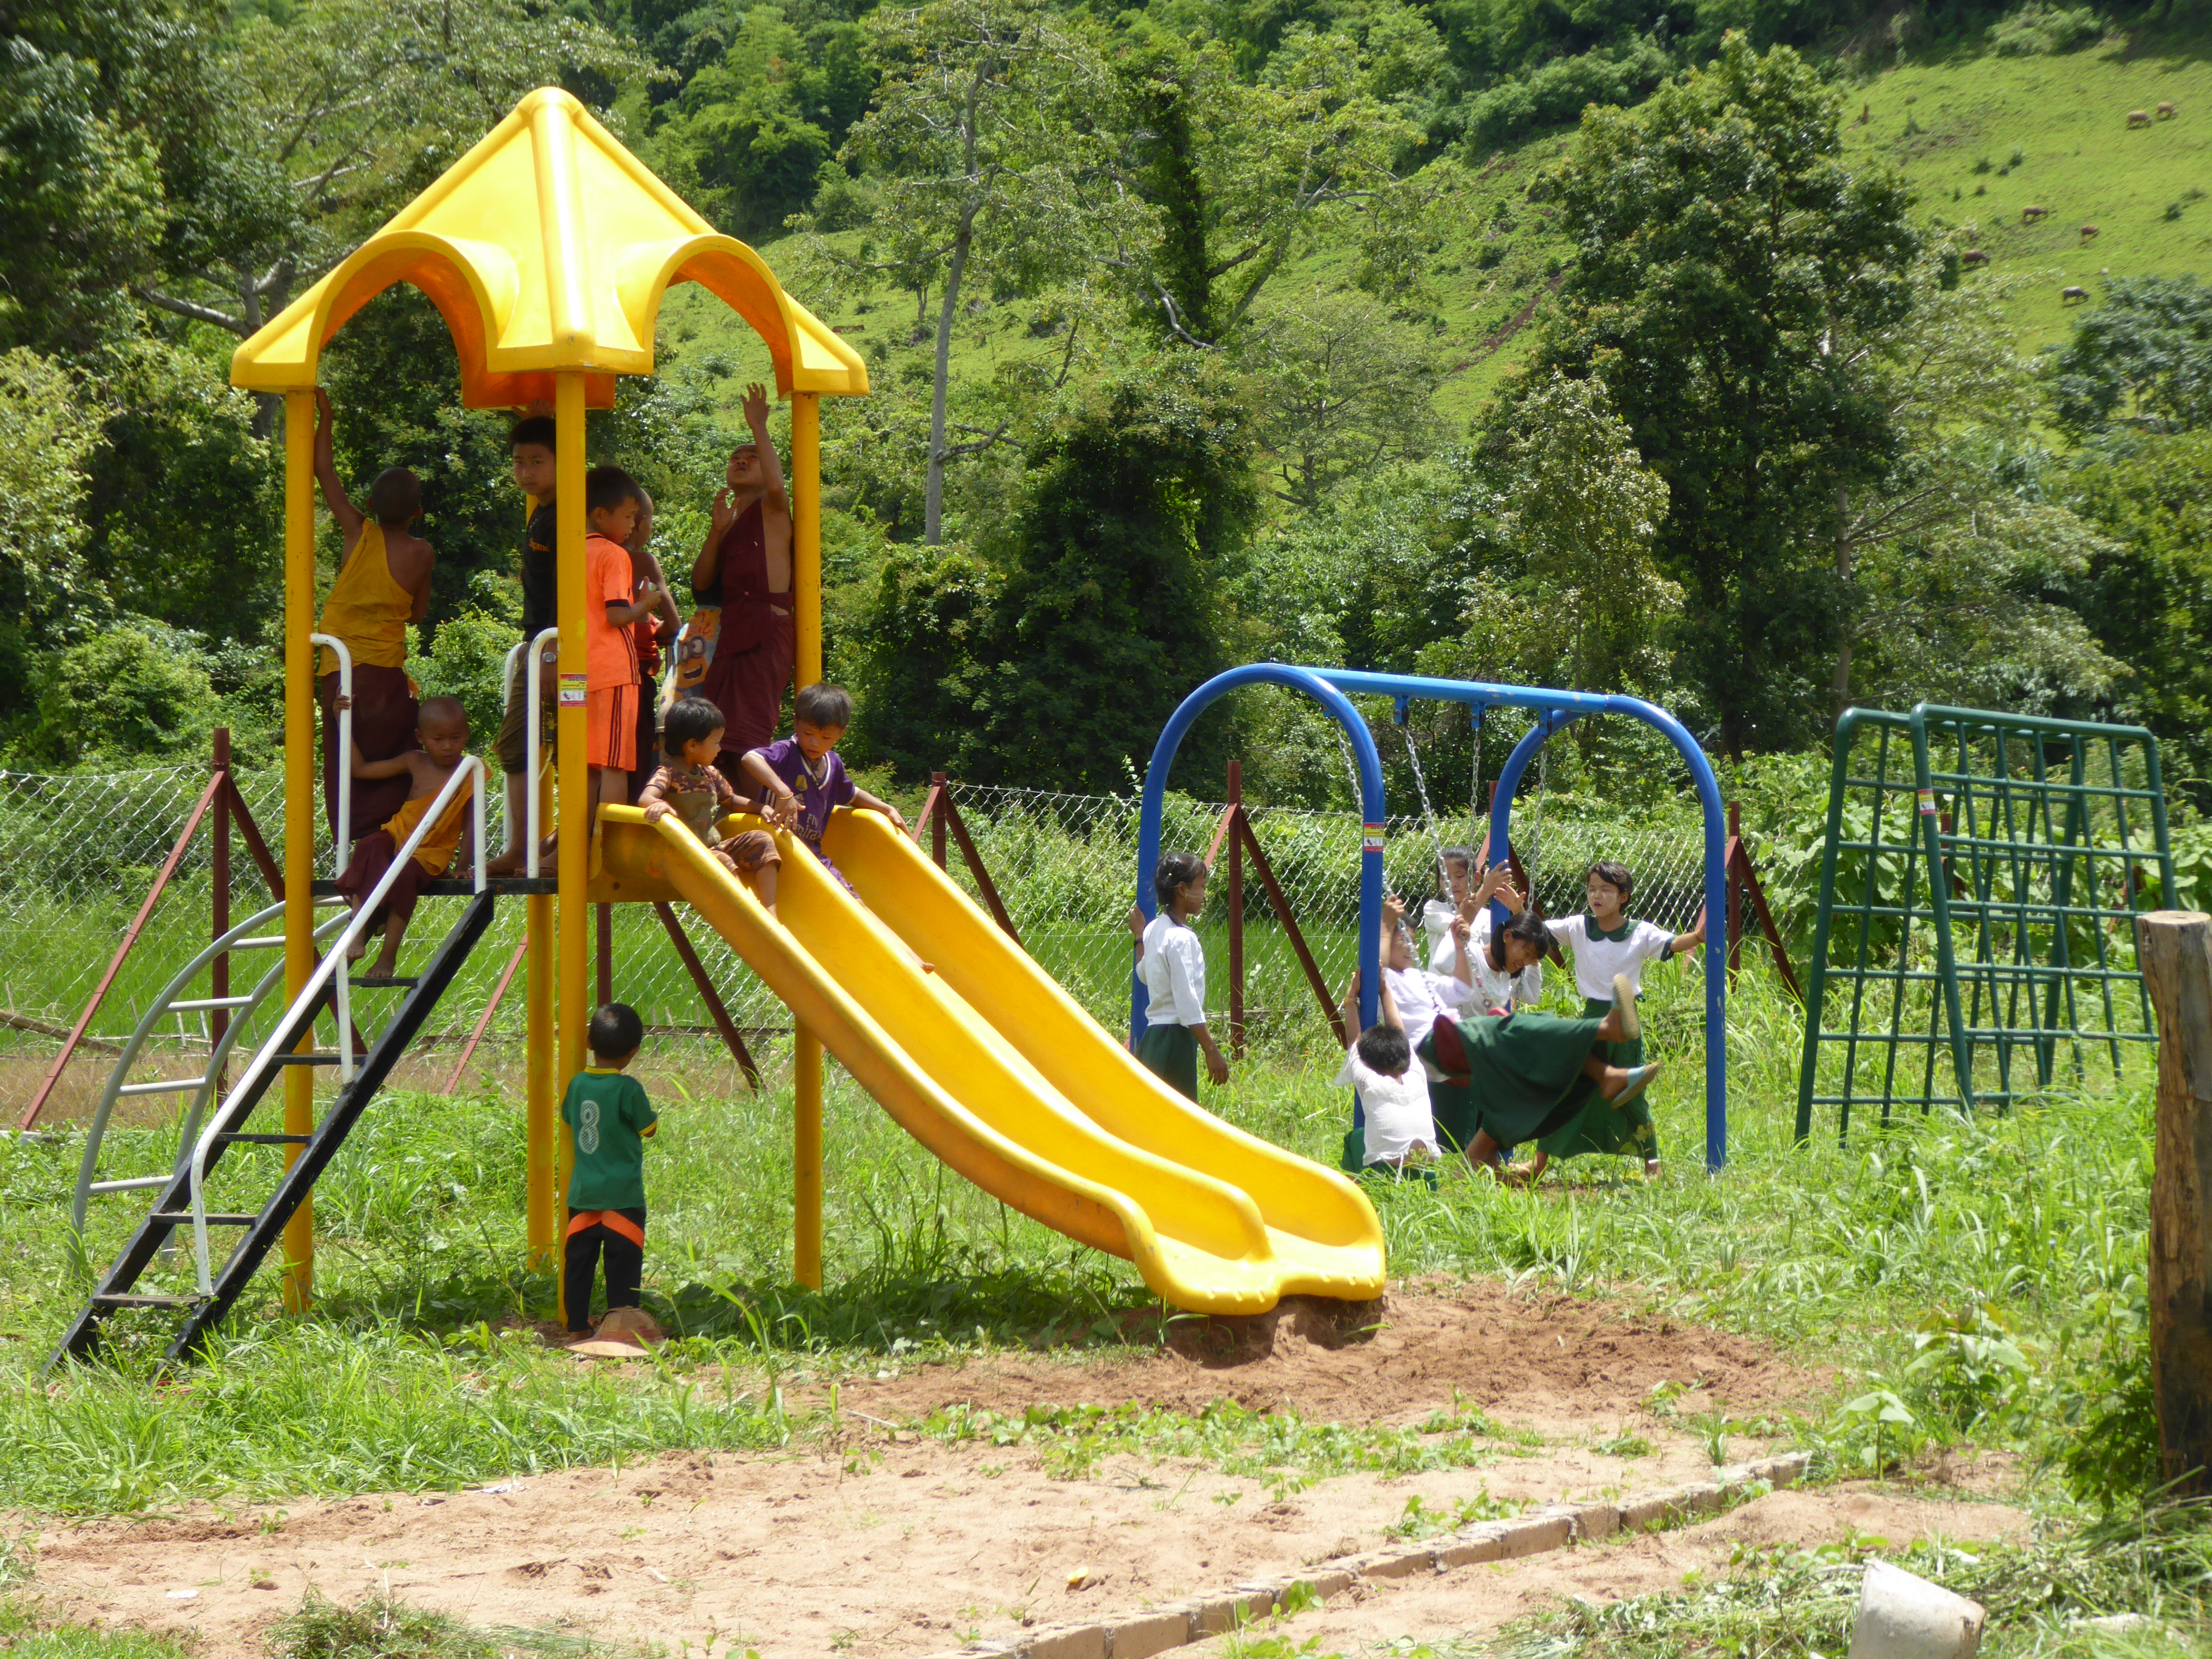 The children of the village are happy about the new playground of the school 